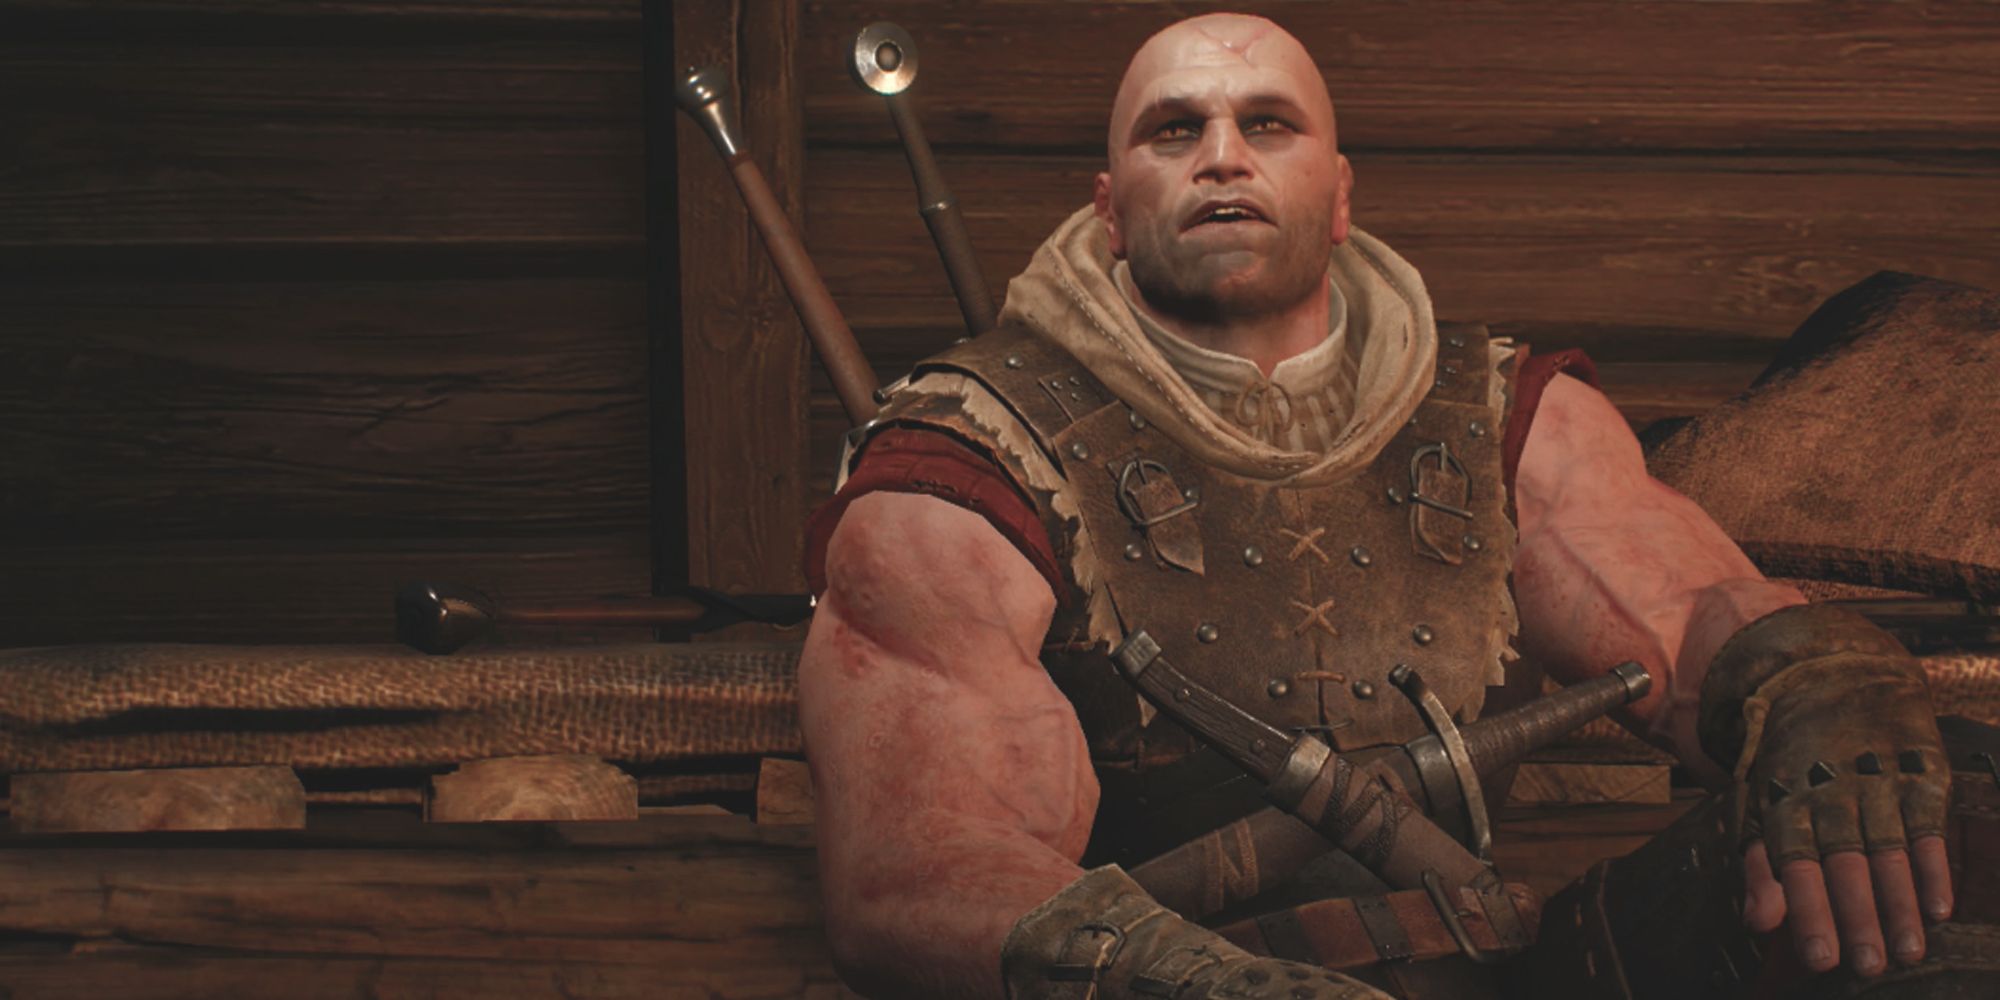 The Witcher Letho sitting down in a wooden cabin